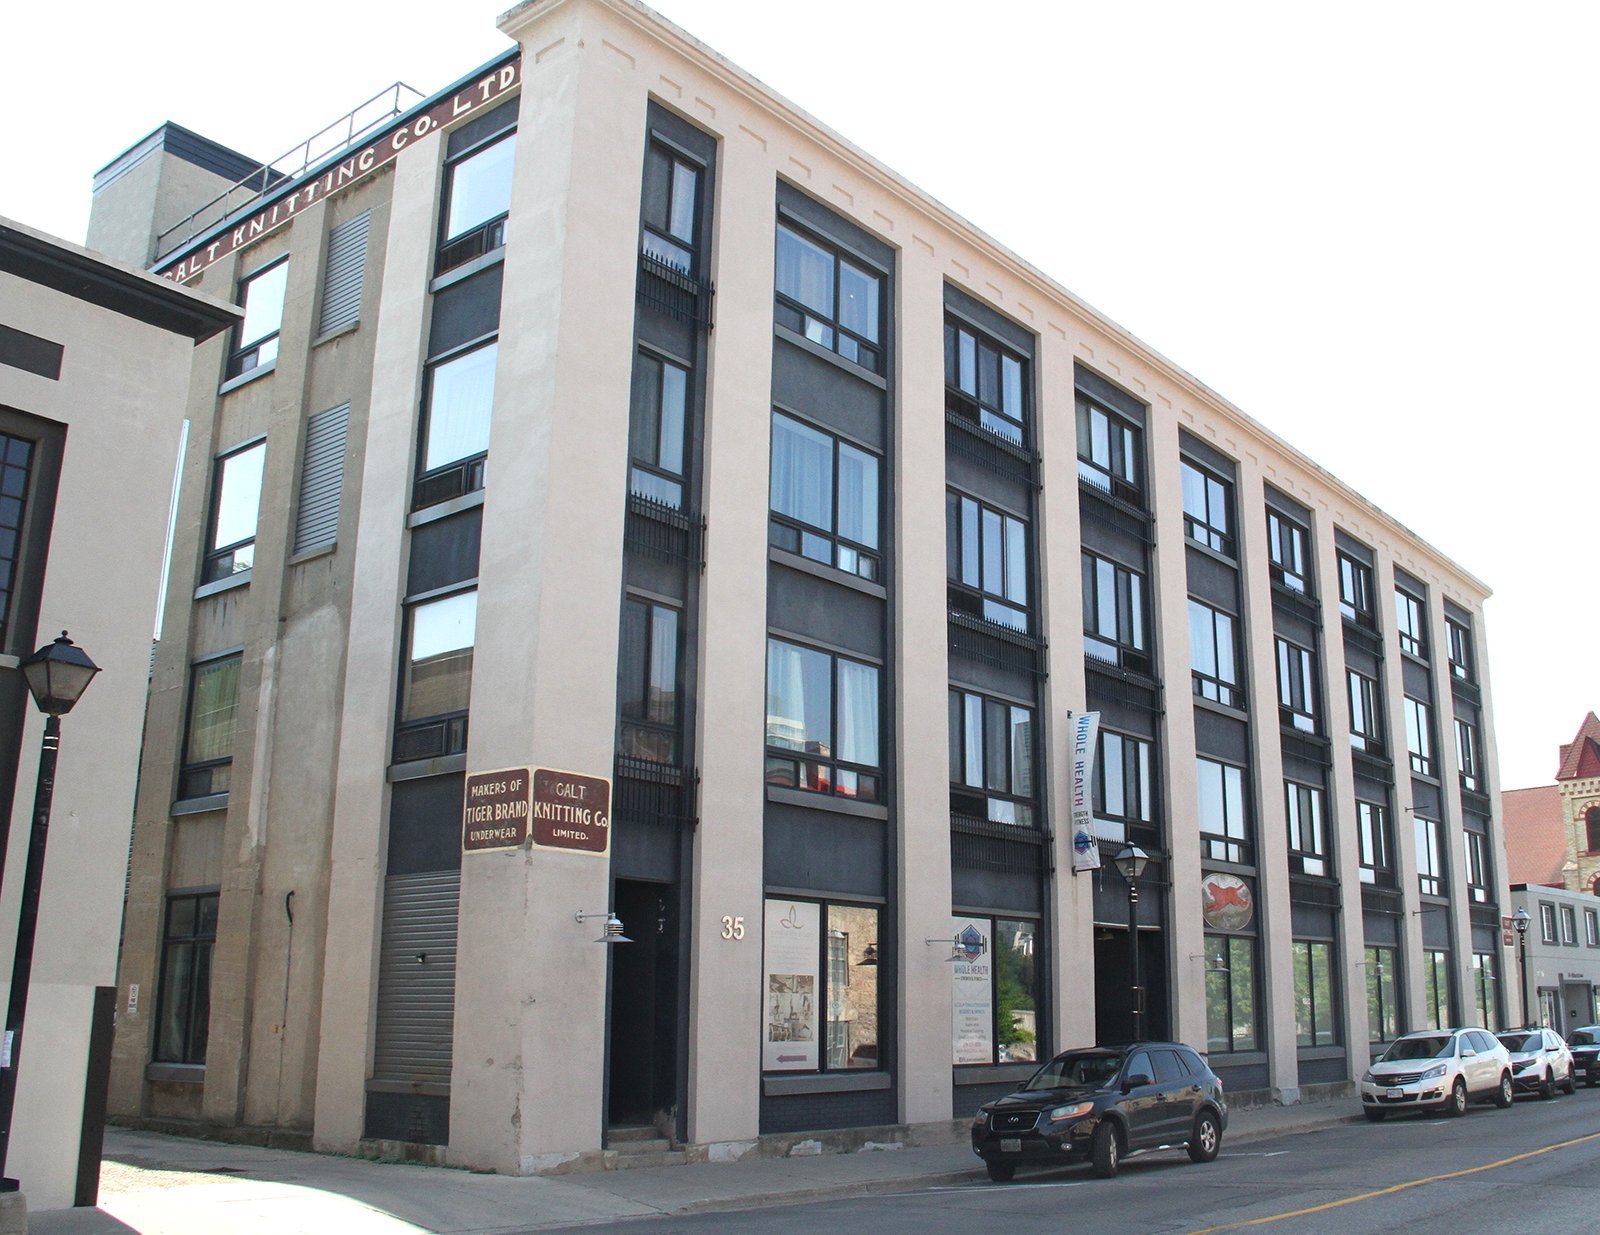 The Tiger Loft apartments is a 54-unit affordable housing building at 35 Water St. S.